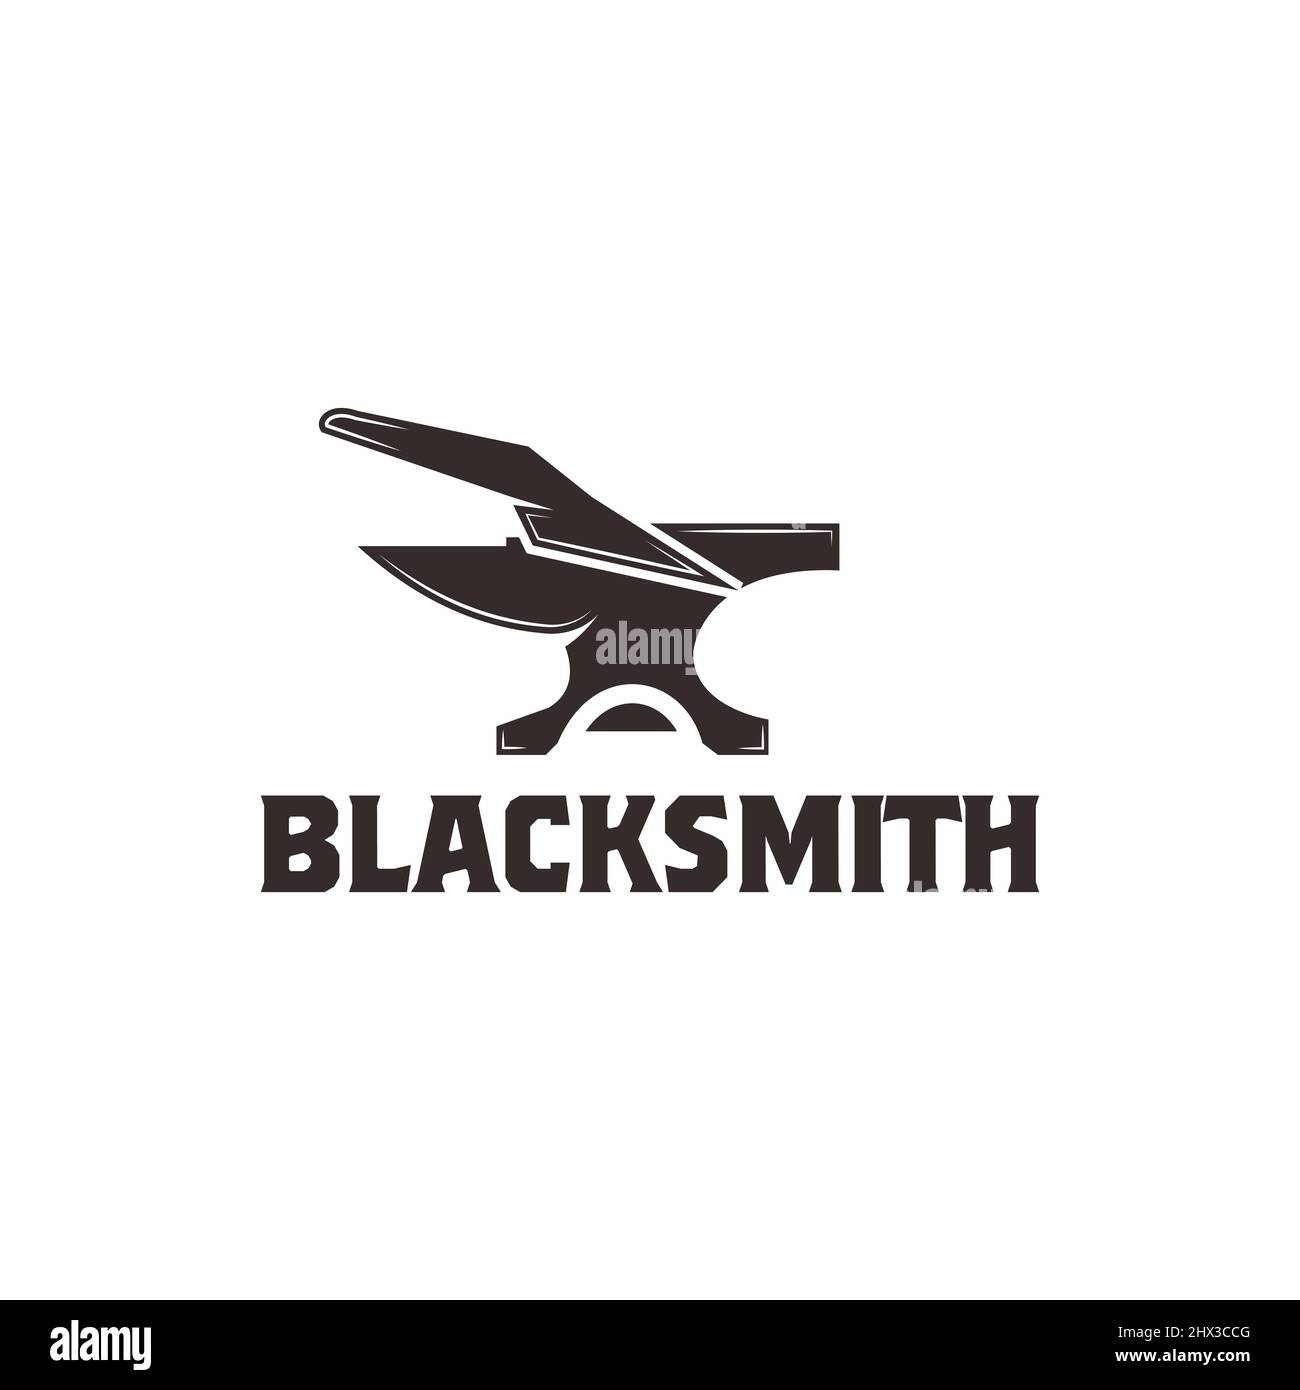 Blacksmith Iron Anvil Forge Foundry vintage logo vector silhouette,black background Stock Vector